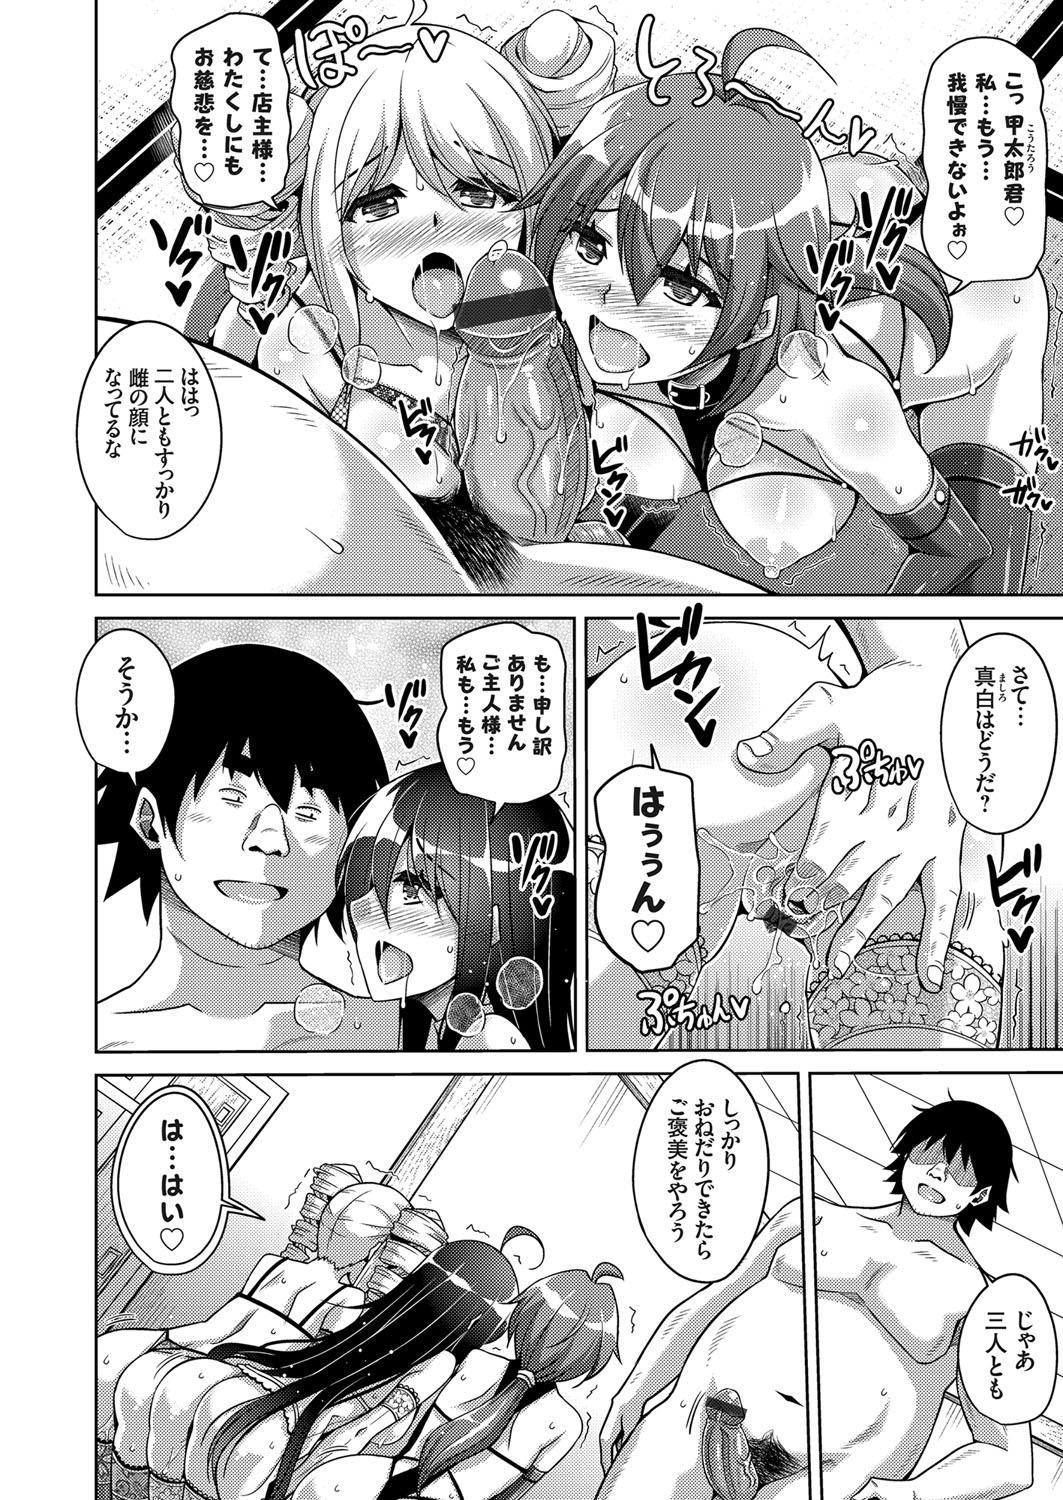 Oldvsyoung COMIC Grape Vol. 75 Lolicon - Page 5